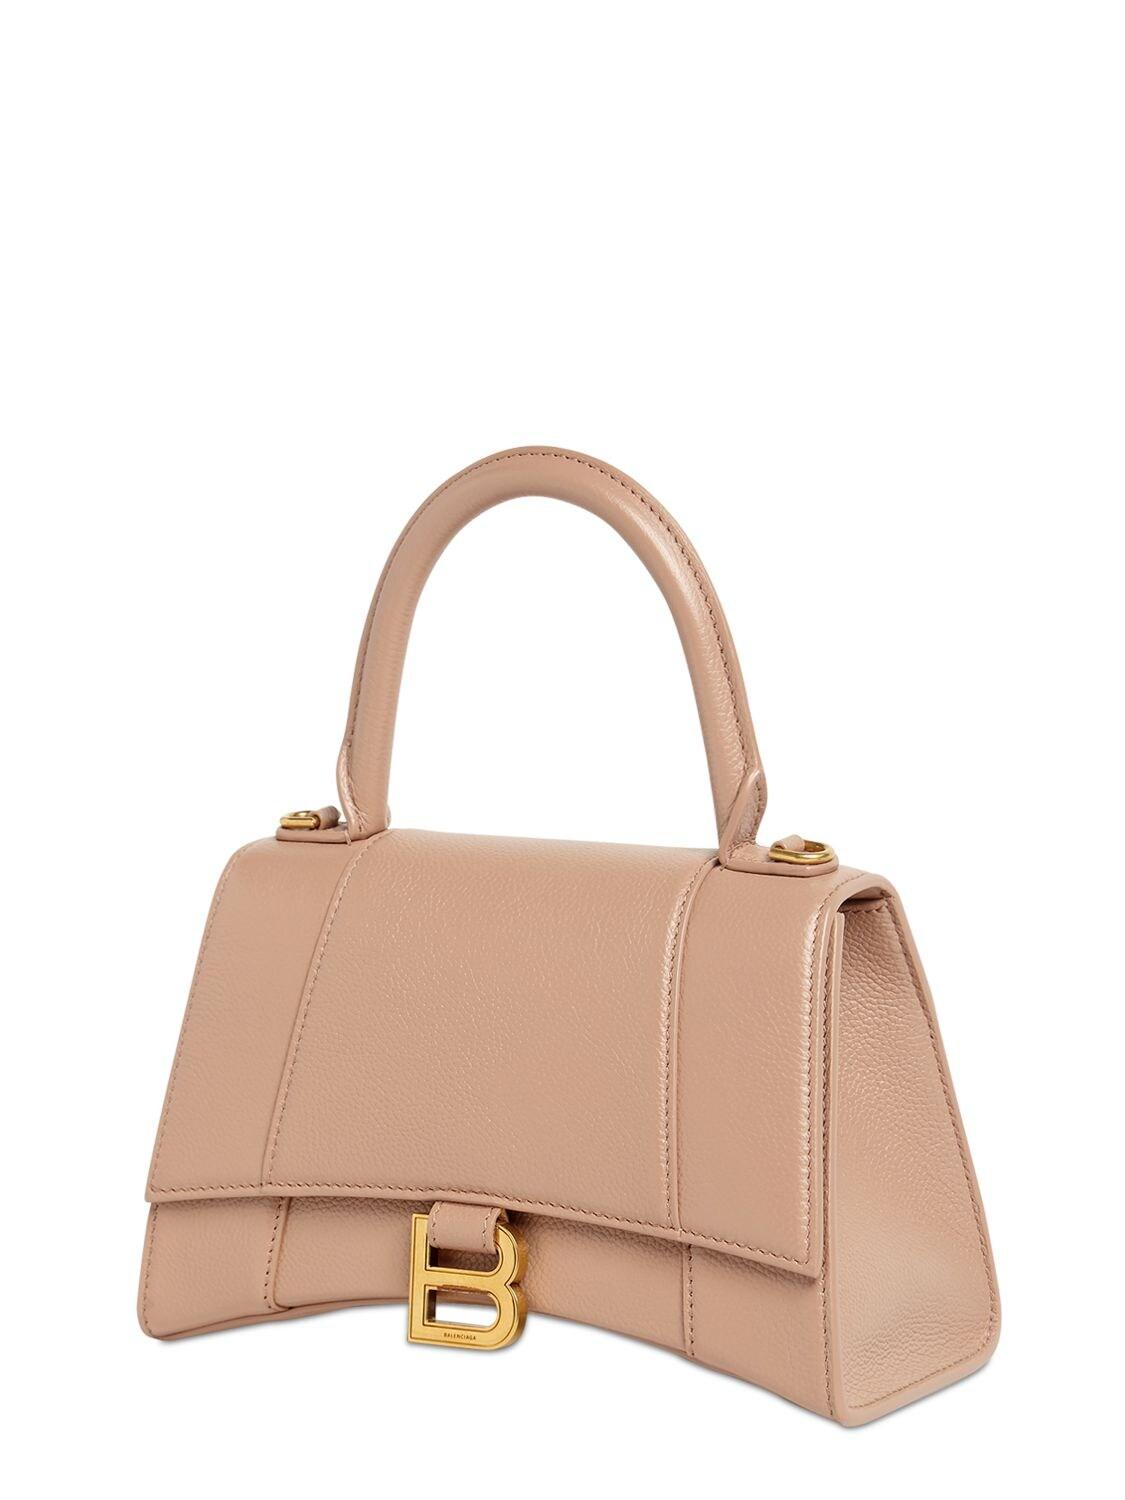 Balenciaga Hourglass Croc-embossed Leather Top Handle Bag in Beige  (Natural) | Lyst